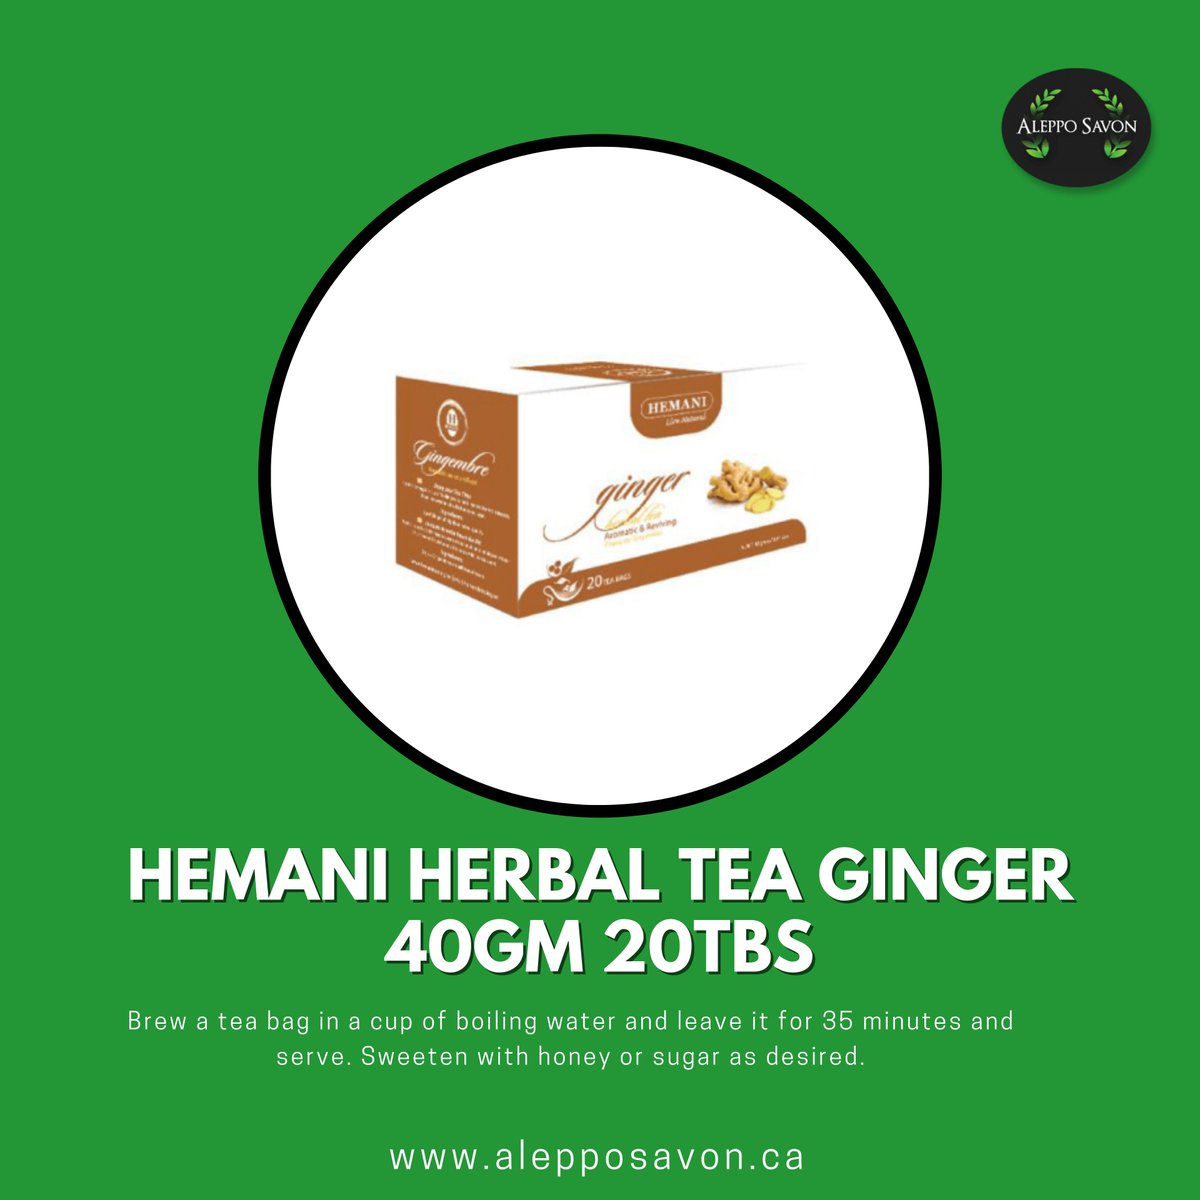 Ginger can help strengthen your immunity and reduce stress. 
.
.
🔗Shop now for Hemani Herbal Tea Ginger 40Gm 20Tbs: alepposavon.ca/products/heman…
.
.
.

 #scentedsoap #sabun #soaps #soapcutting #skin #relax #handcraftedsoap #scent #skinhealth #love #beauty #soapmaking #handcrafted